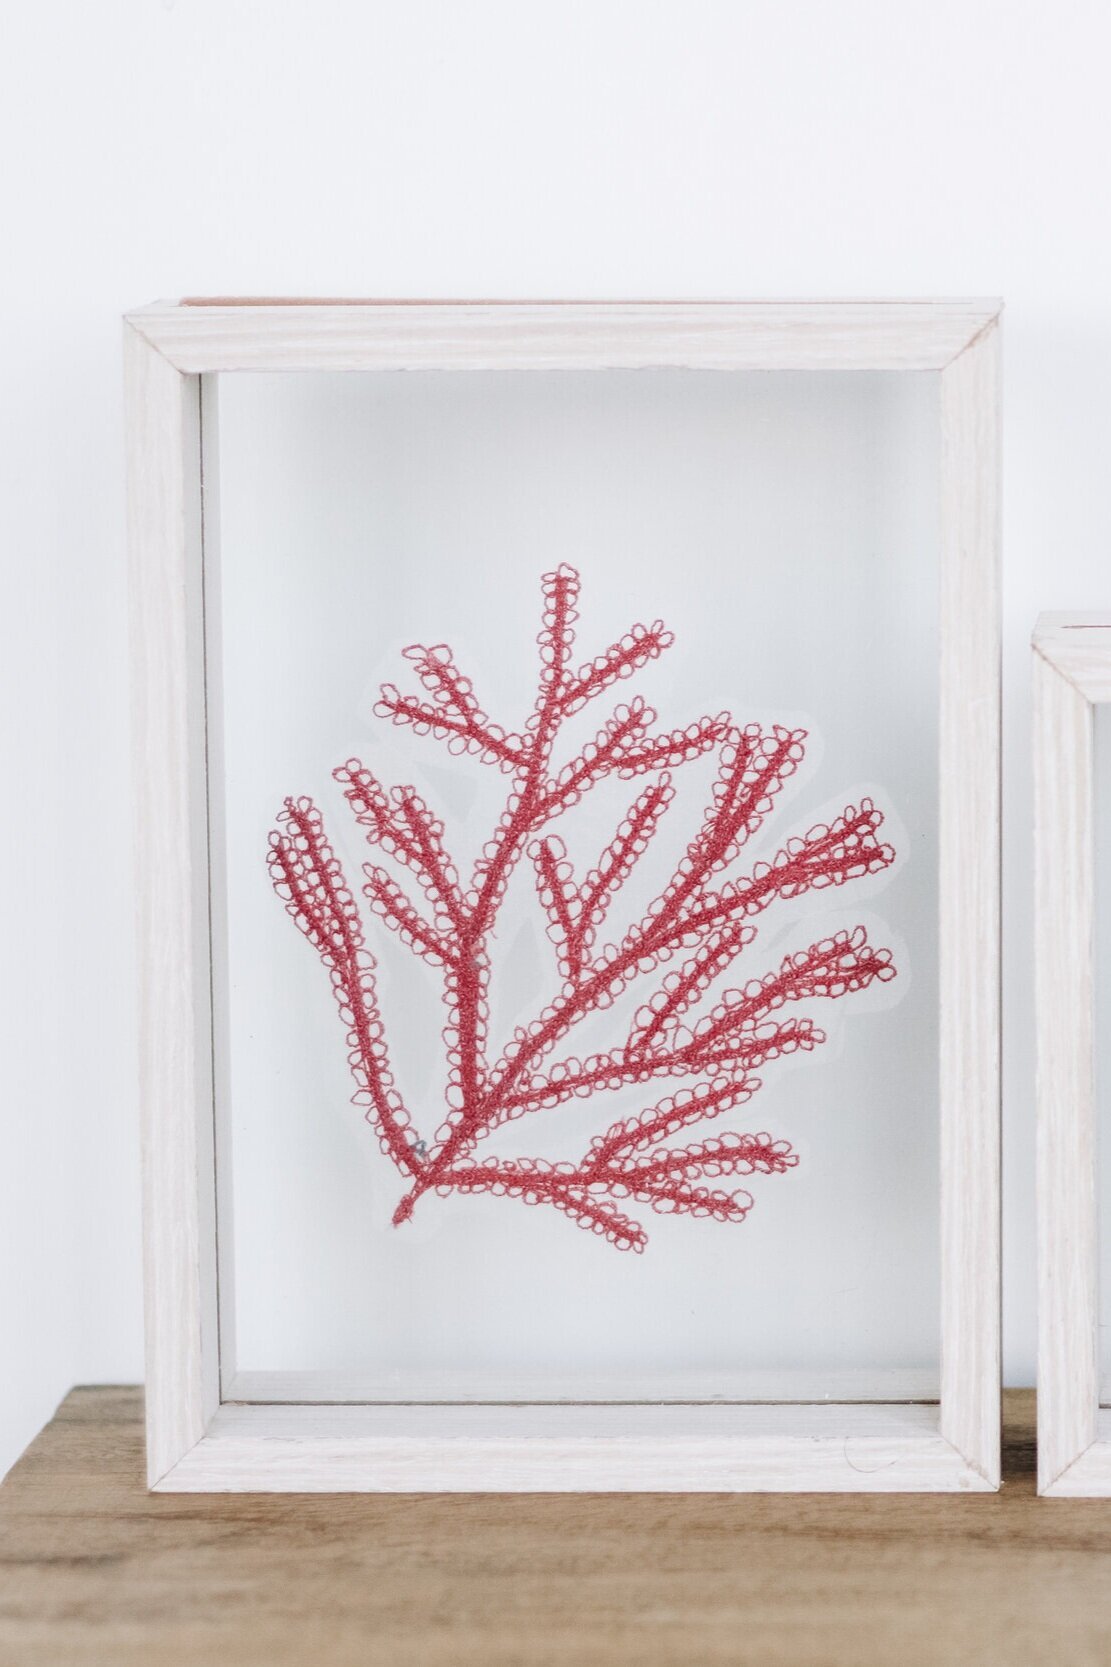 Coral art using free motion embroidery